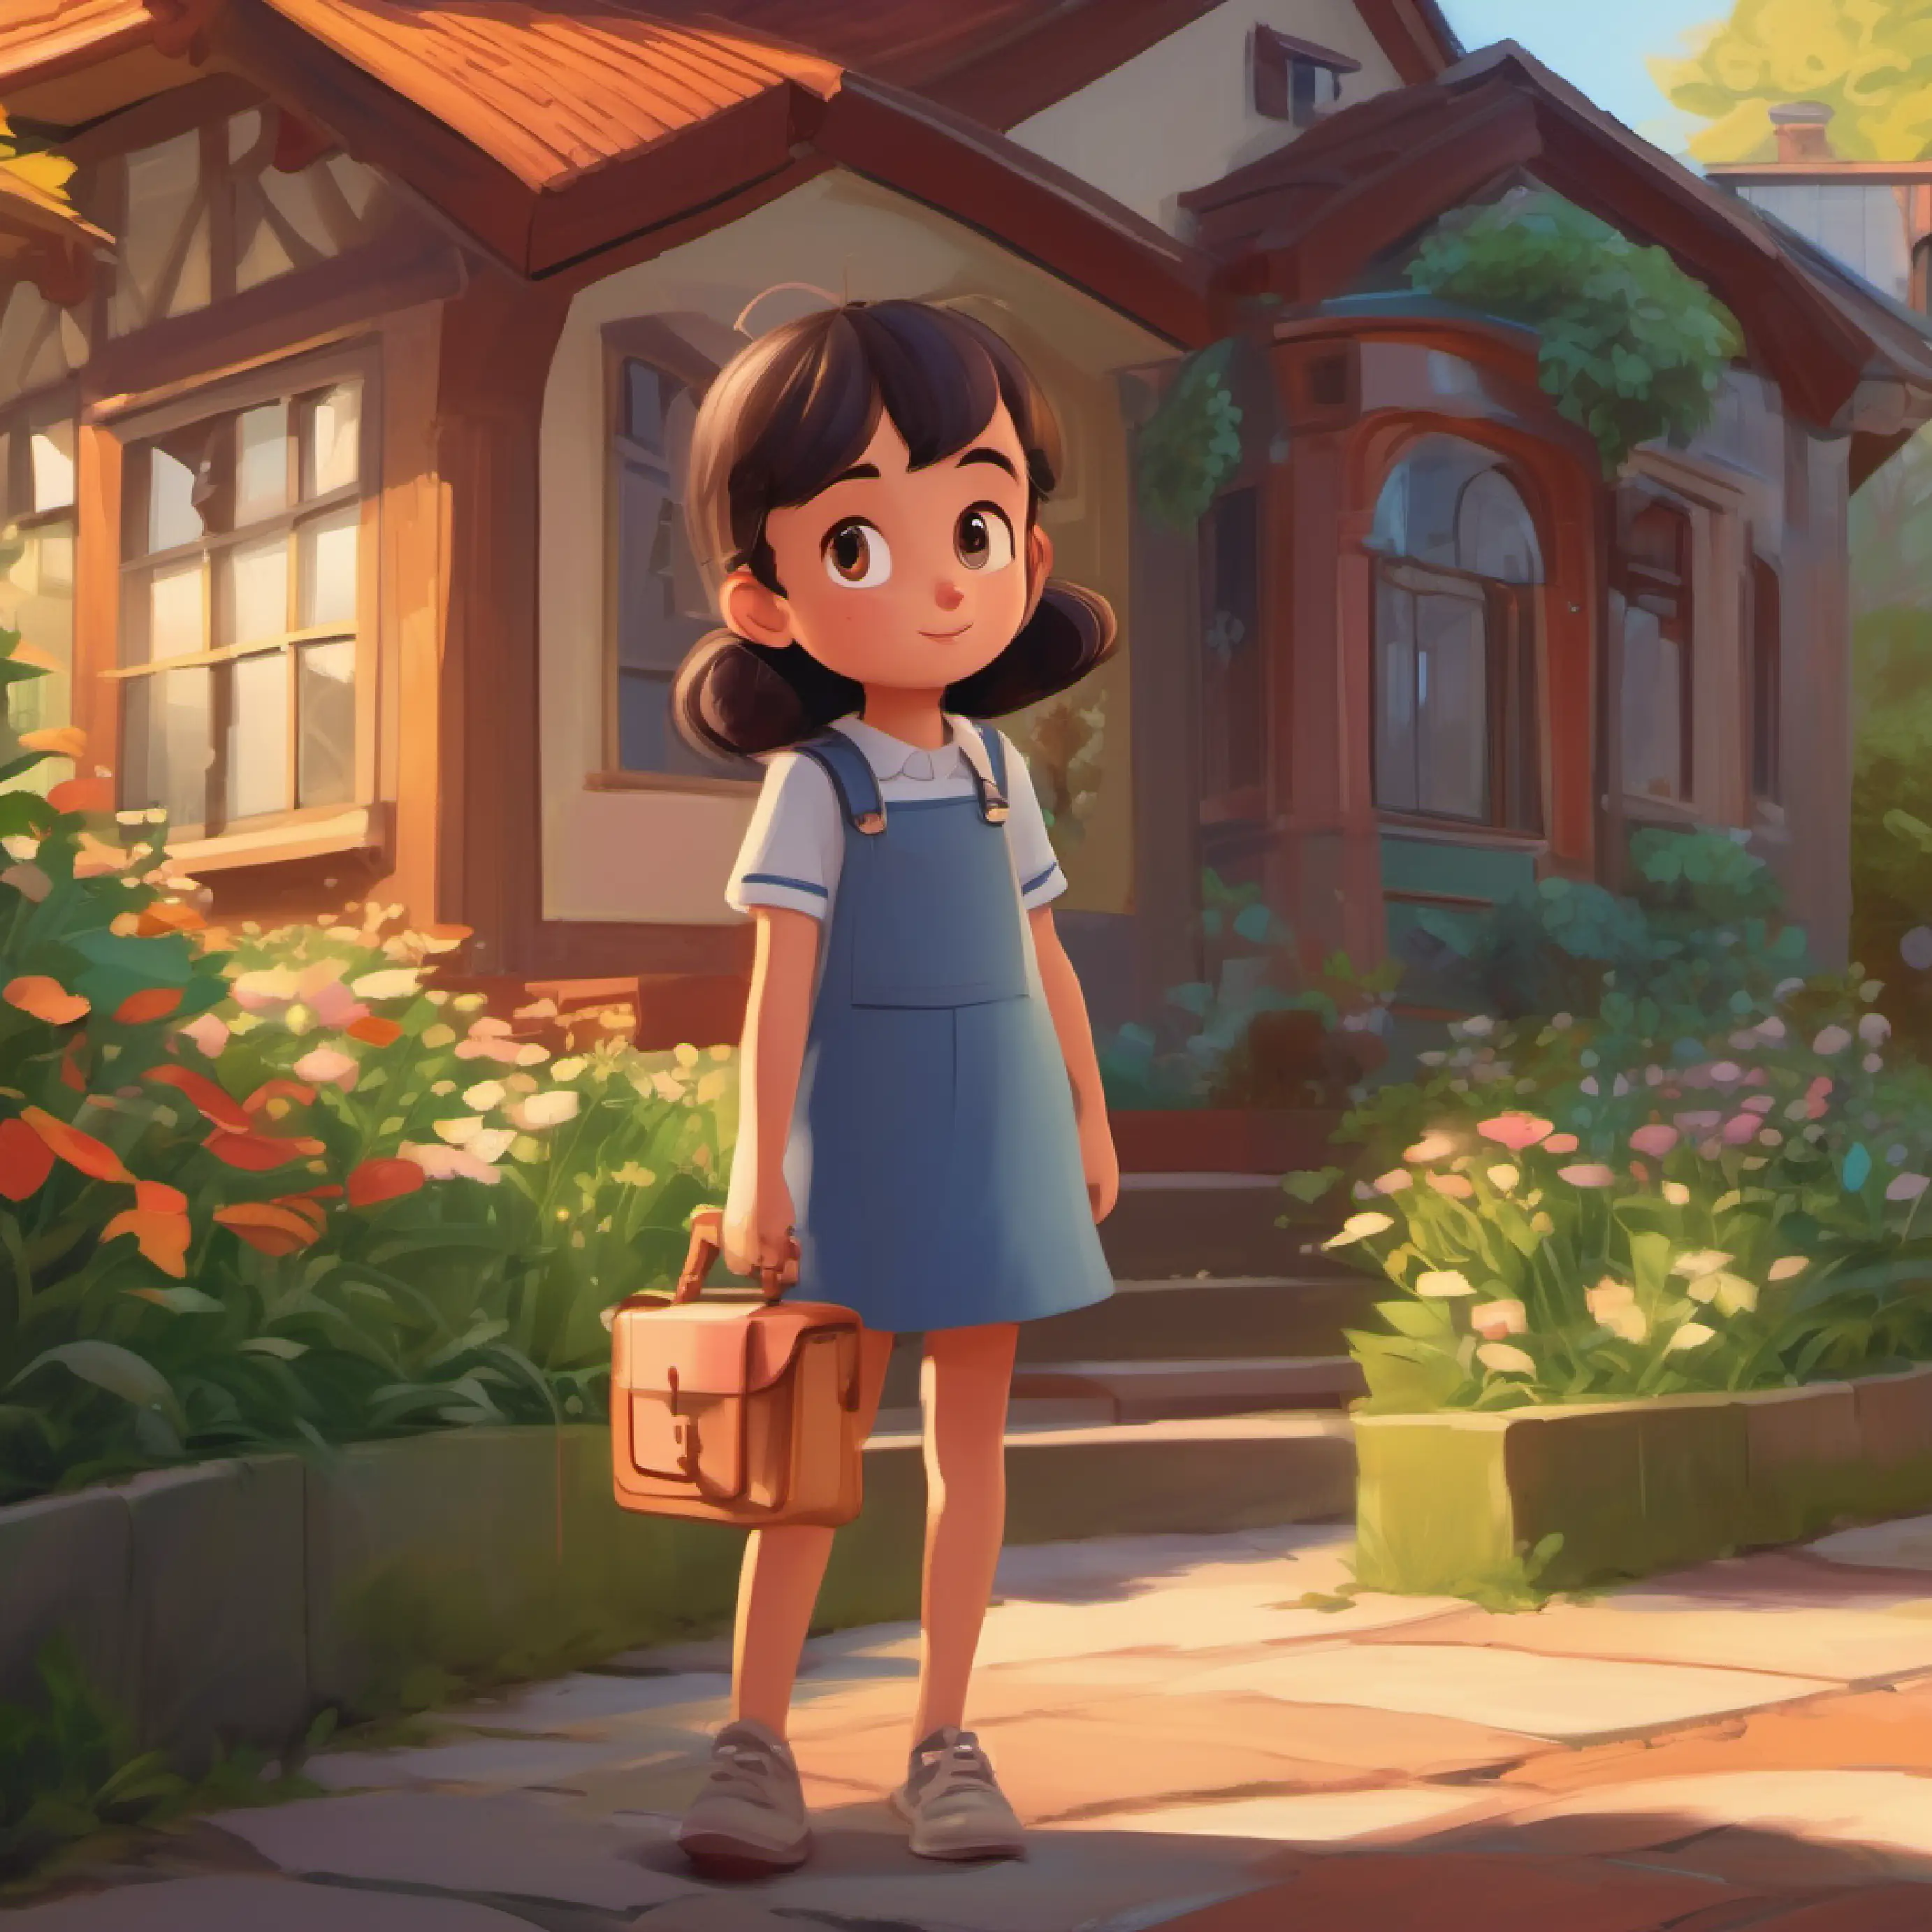 Introducing Amy, a curious girl who loves counting, in a calm neighborhood.